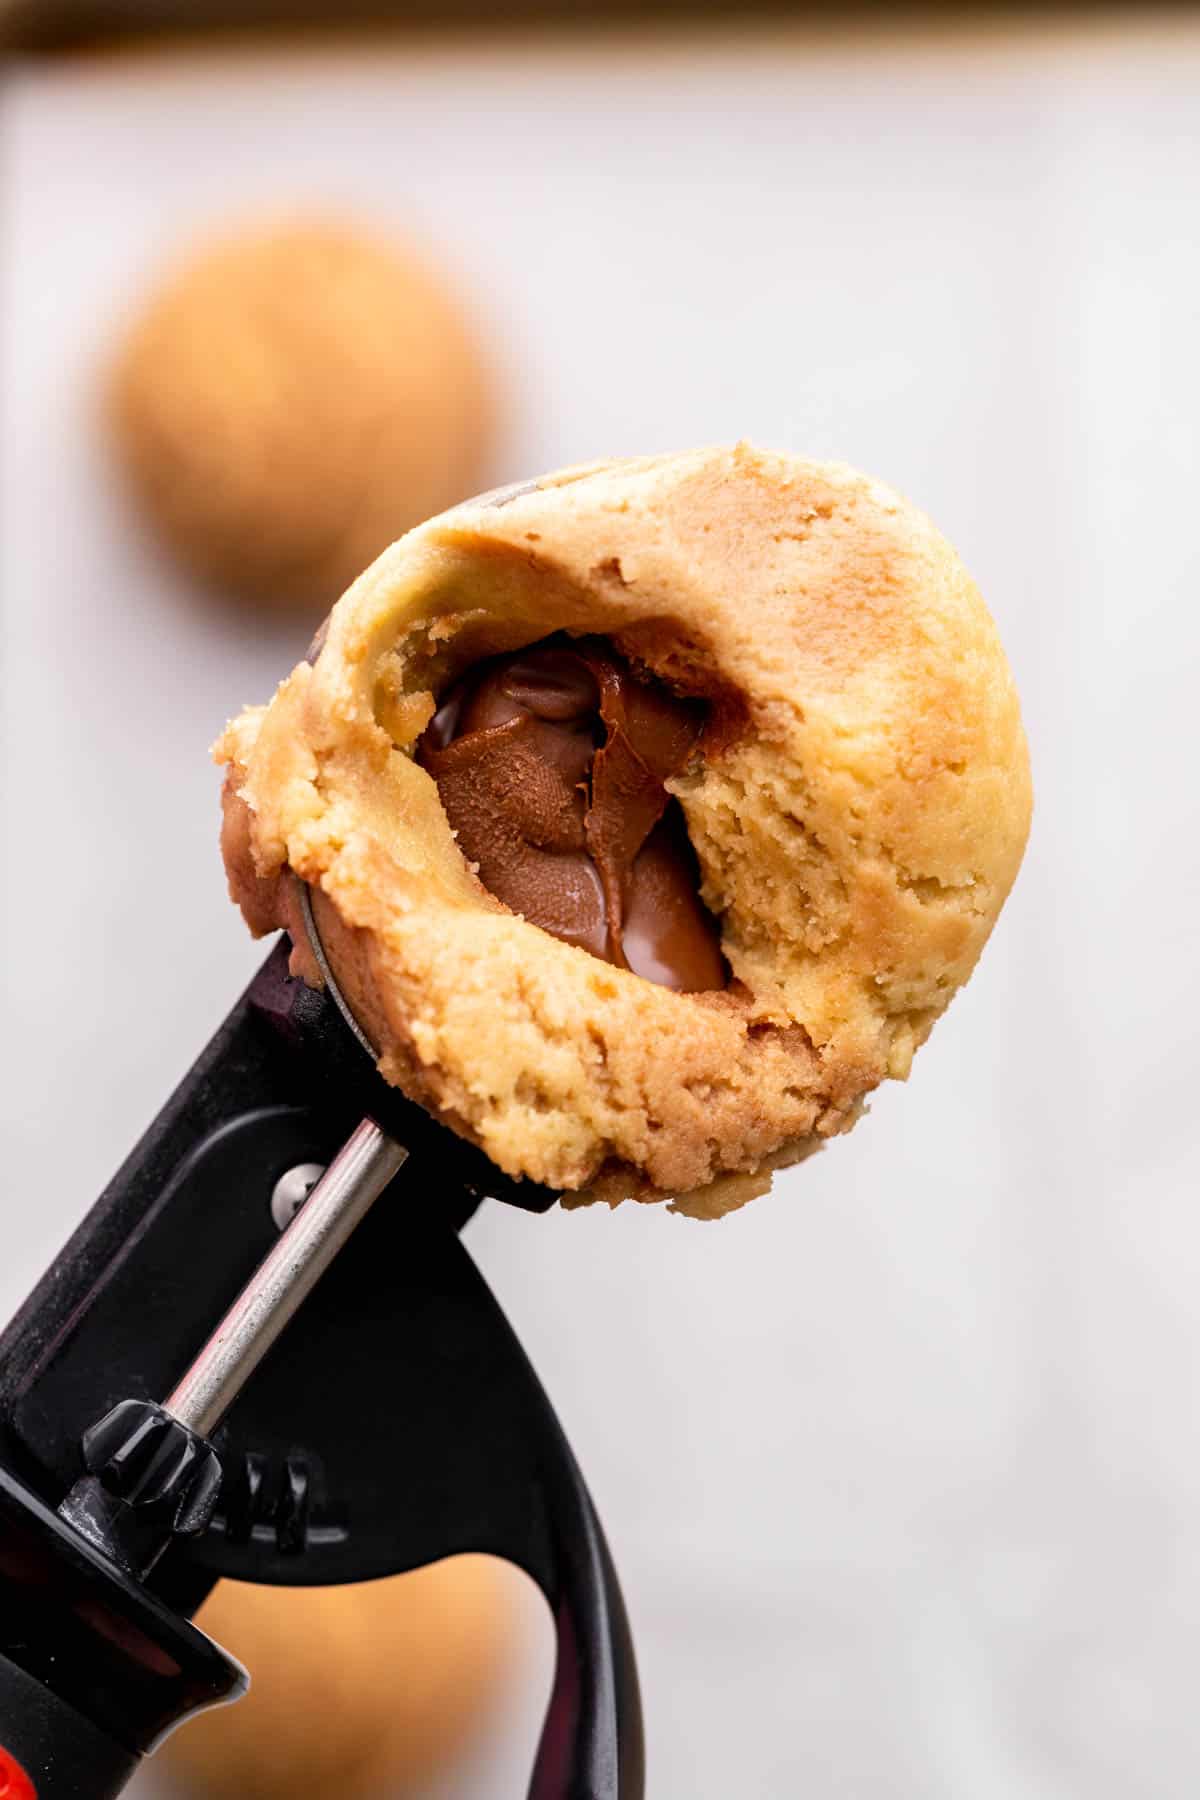 Nutella inside a cookie dough ball.